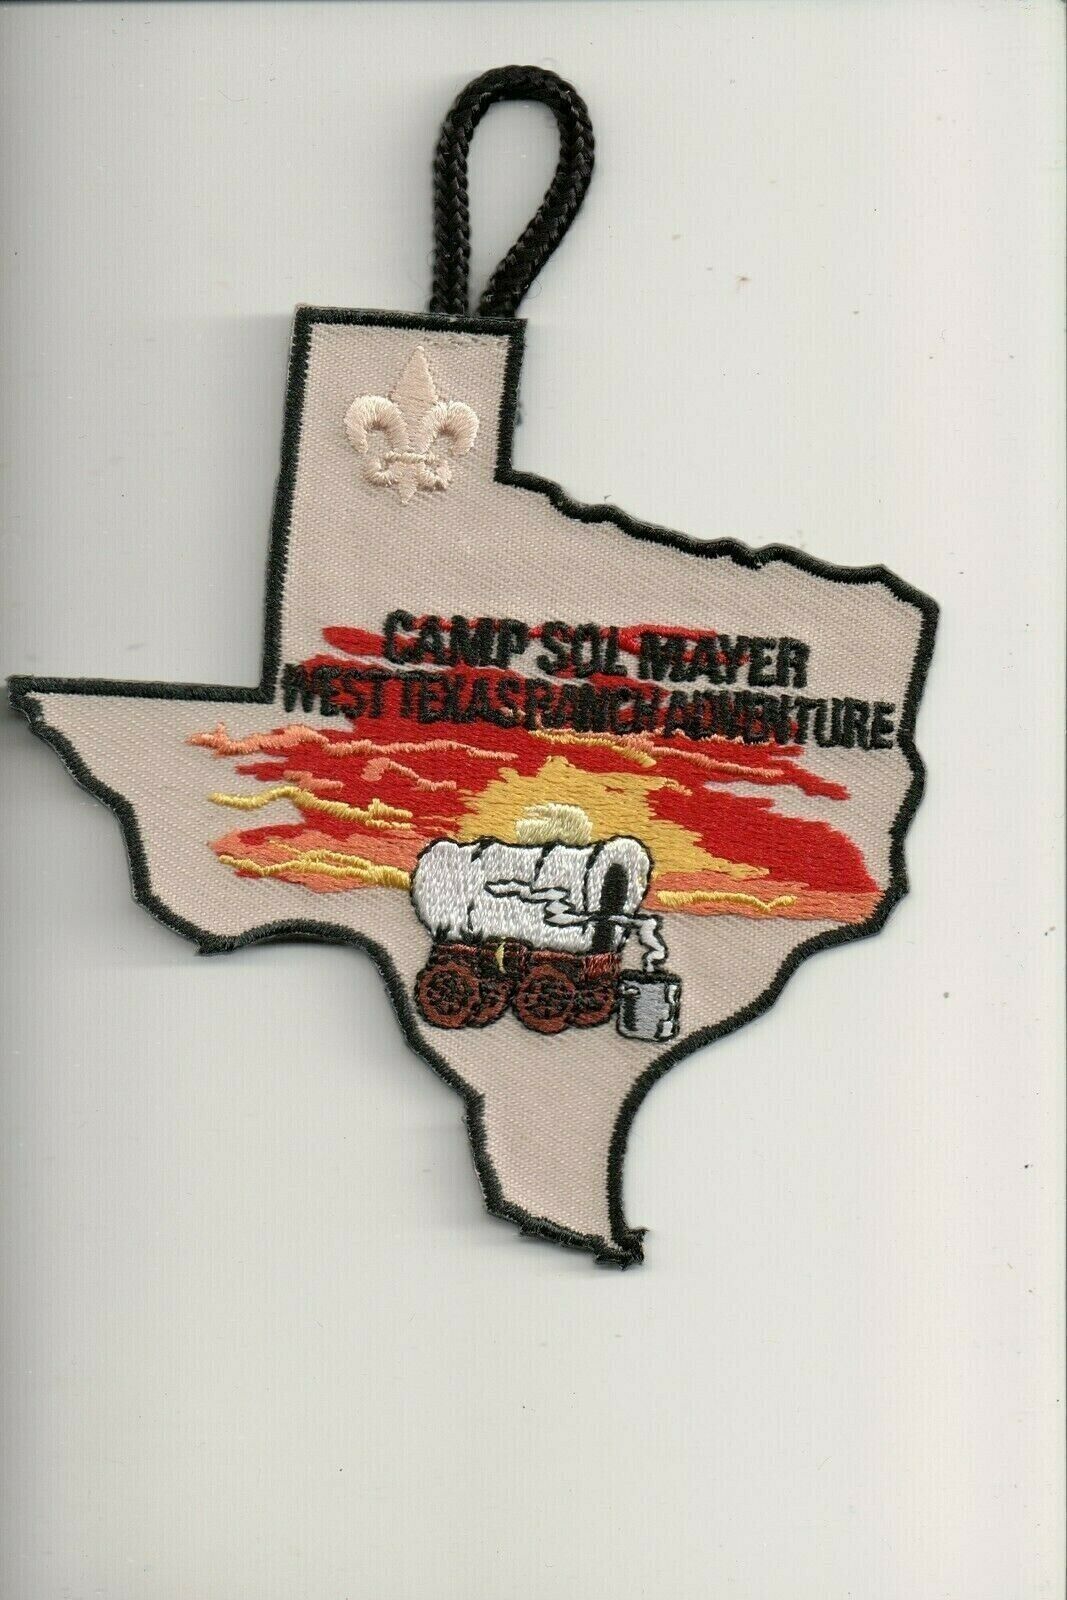 Camp Sol Mayer West Texas Ranch Adventure patch